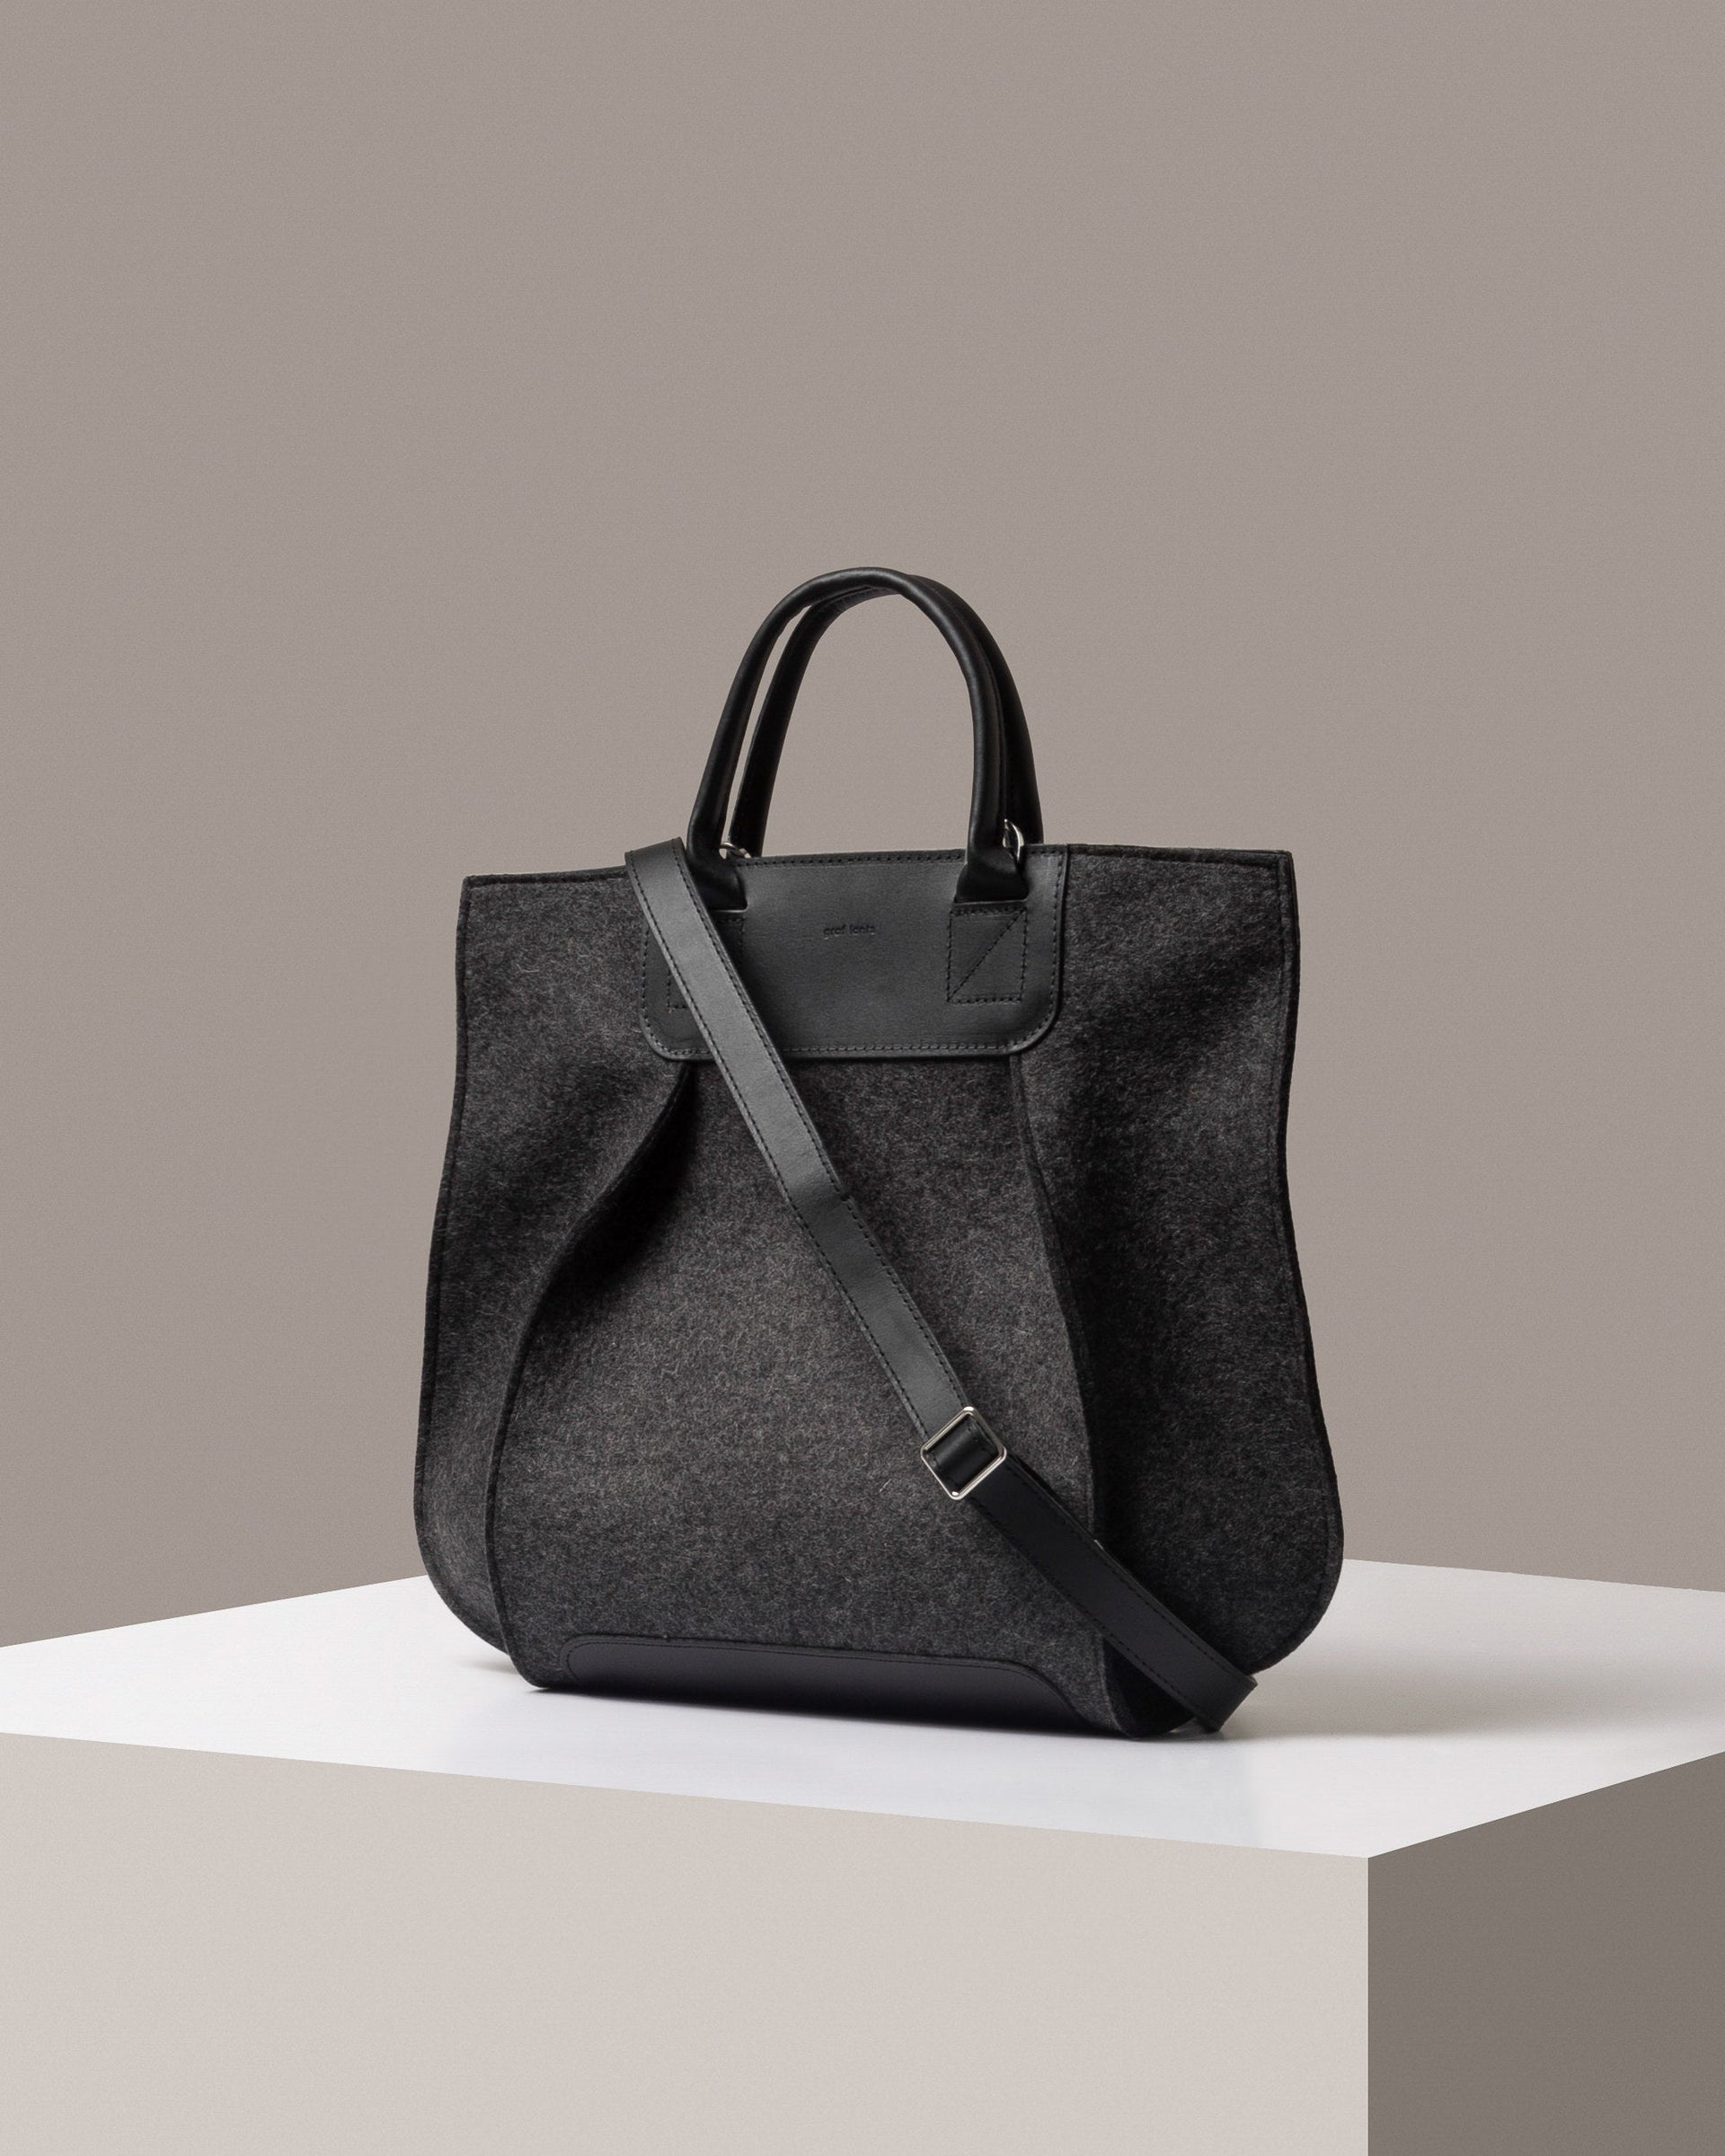 A stylish Frankie Merino Wool Felt Tote bag in dark gray with a black leather shoulder strap, displayed in a three-quarter view on a white base